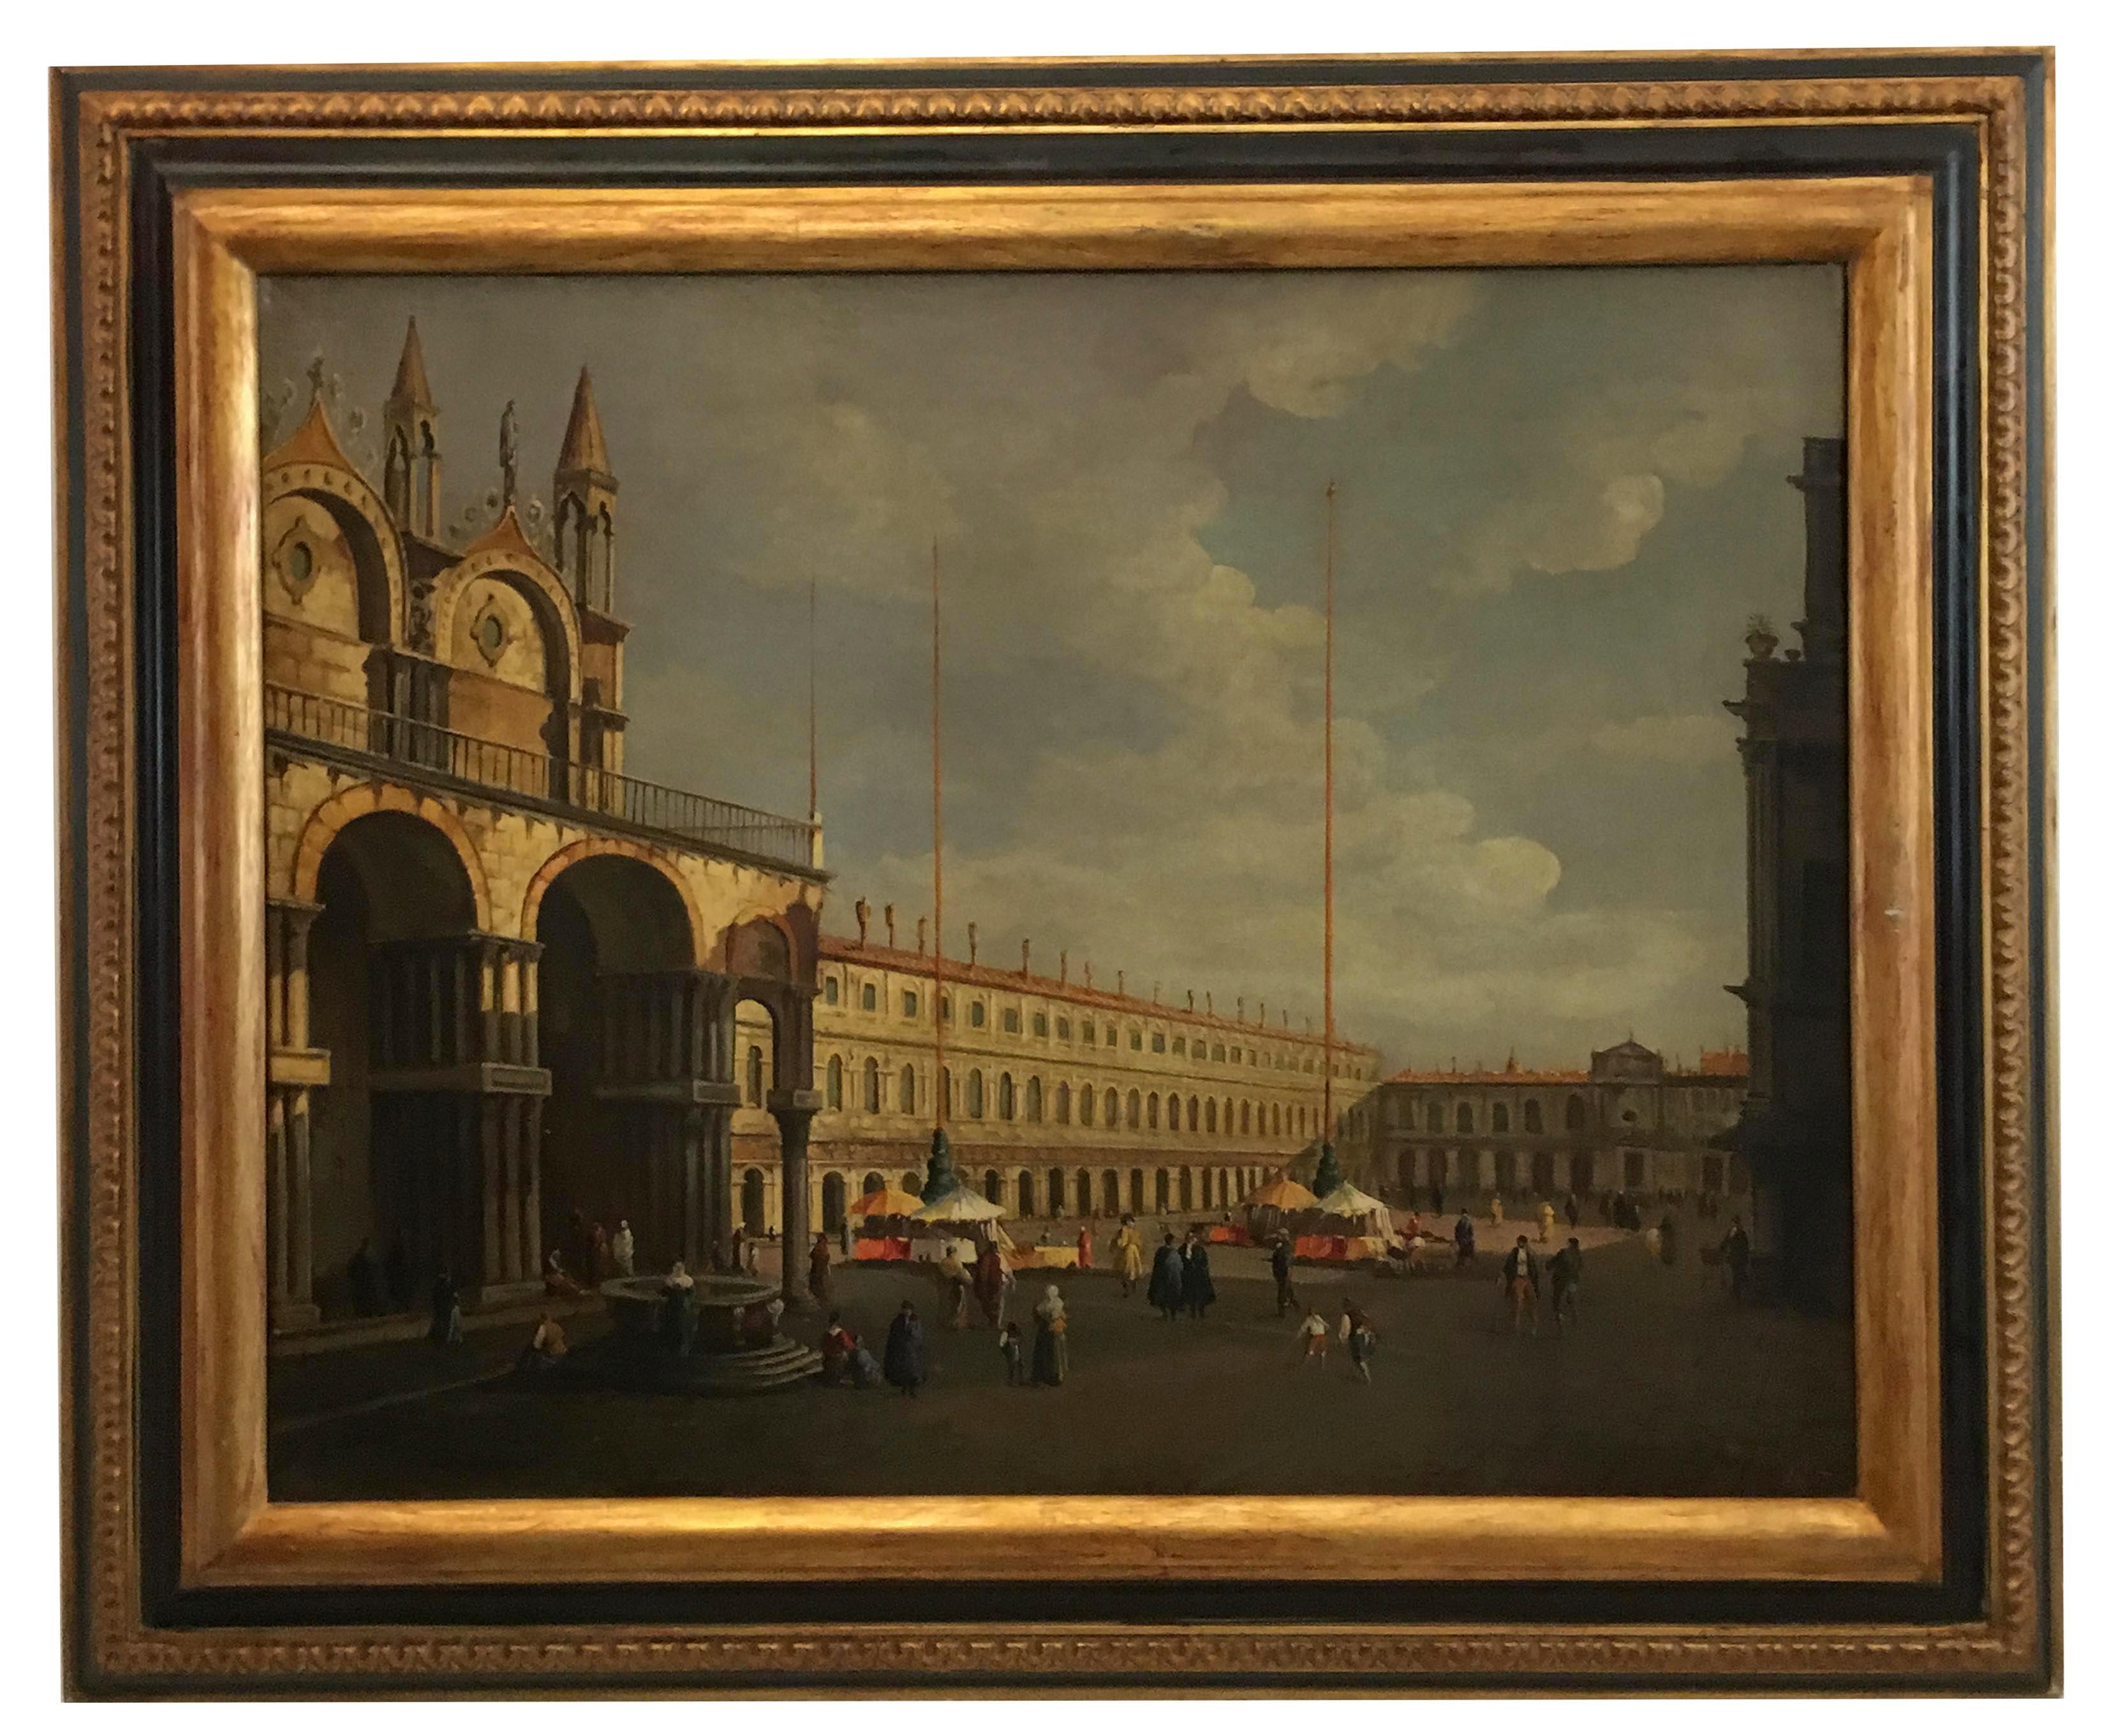 Mario De Angeli Landscape Painting - VENICE - In the Manner of Canaletto -Italian Landscape Oil on Canvas Painting